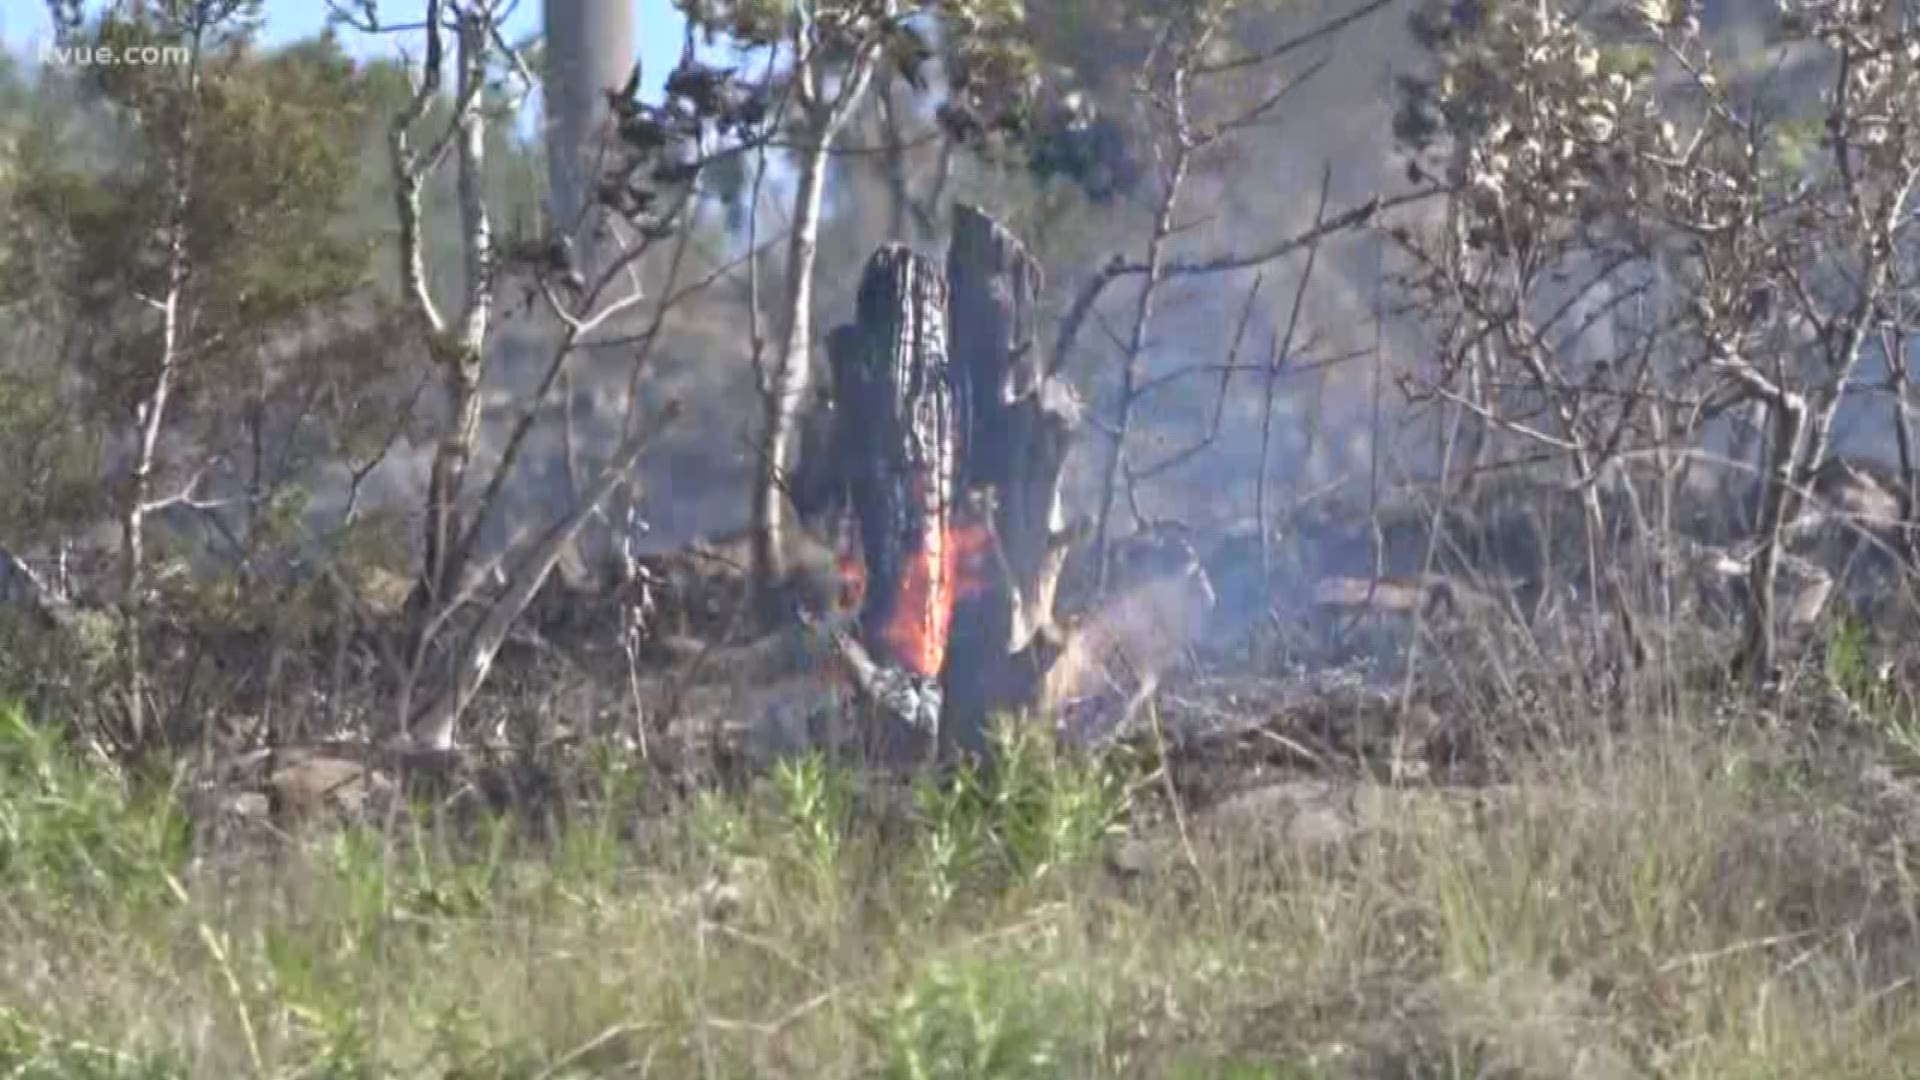 Firefighters stopped a large brush fire from spreading Sunday in western Travis County.